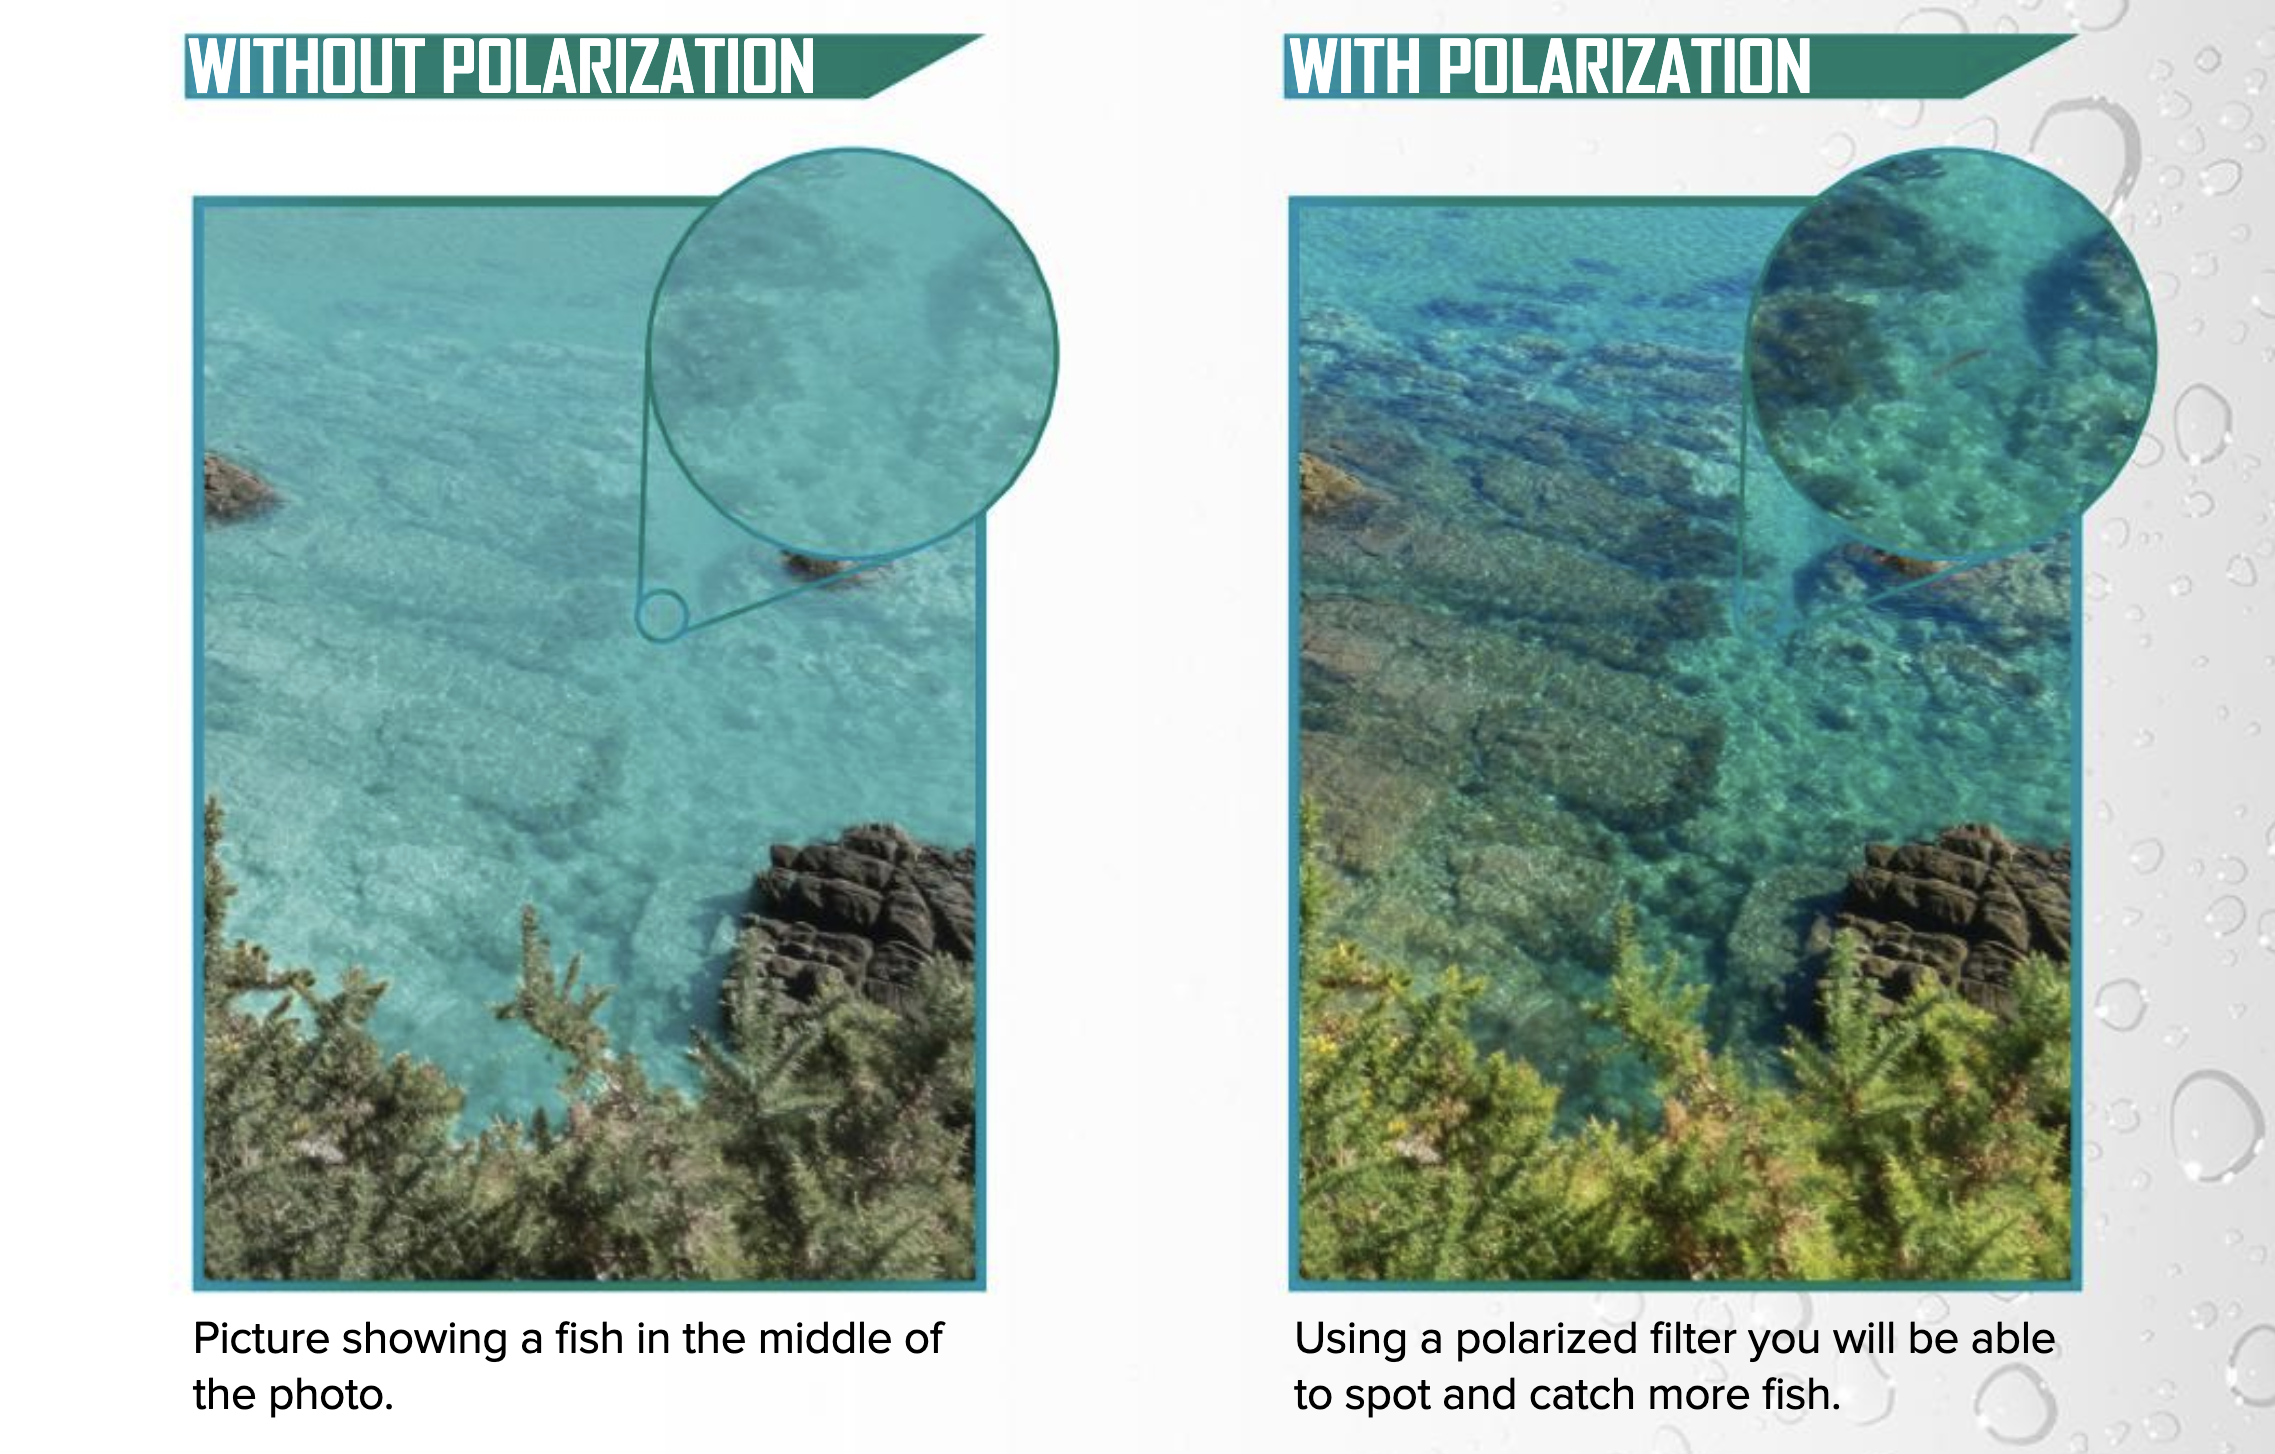 view of water and fish through polarized lenses compared to standard lenses